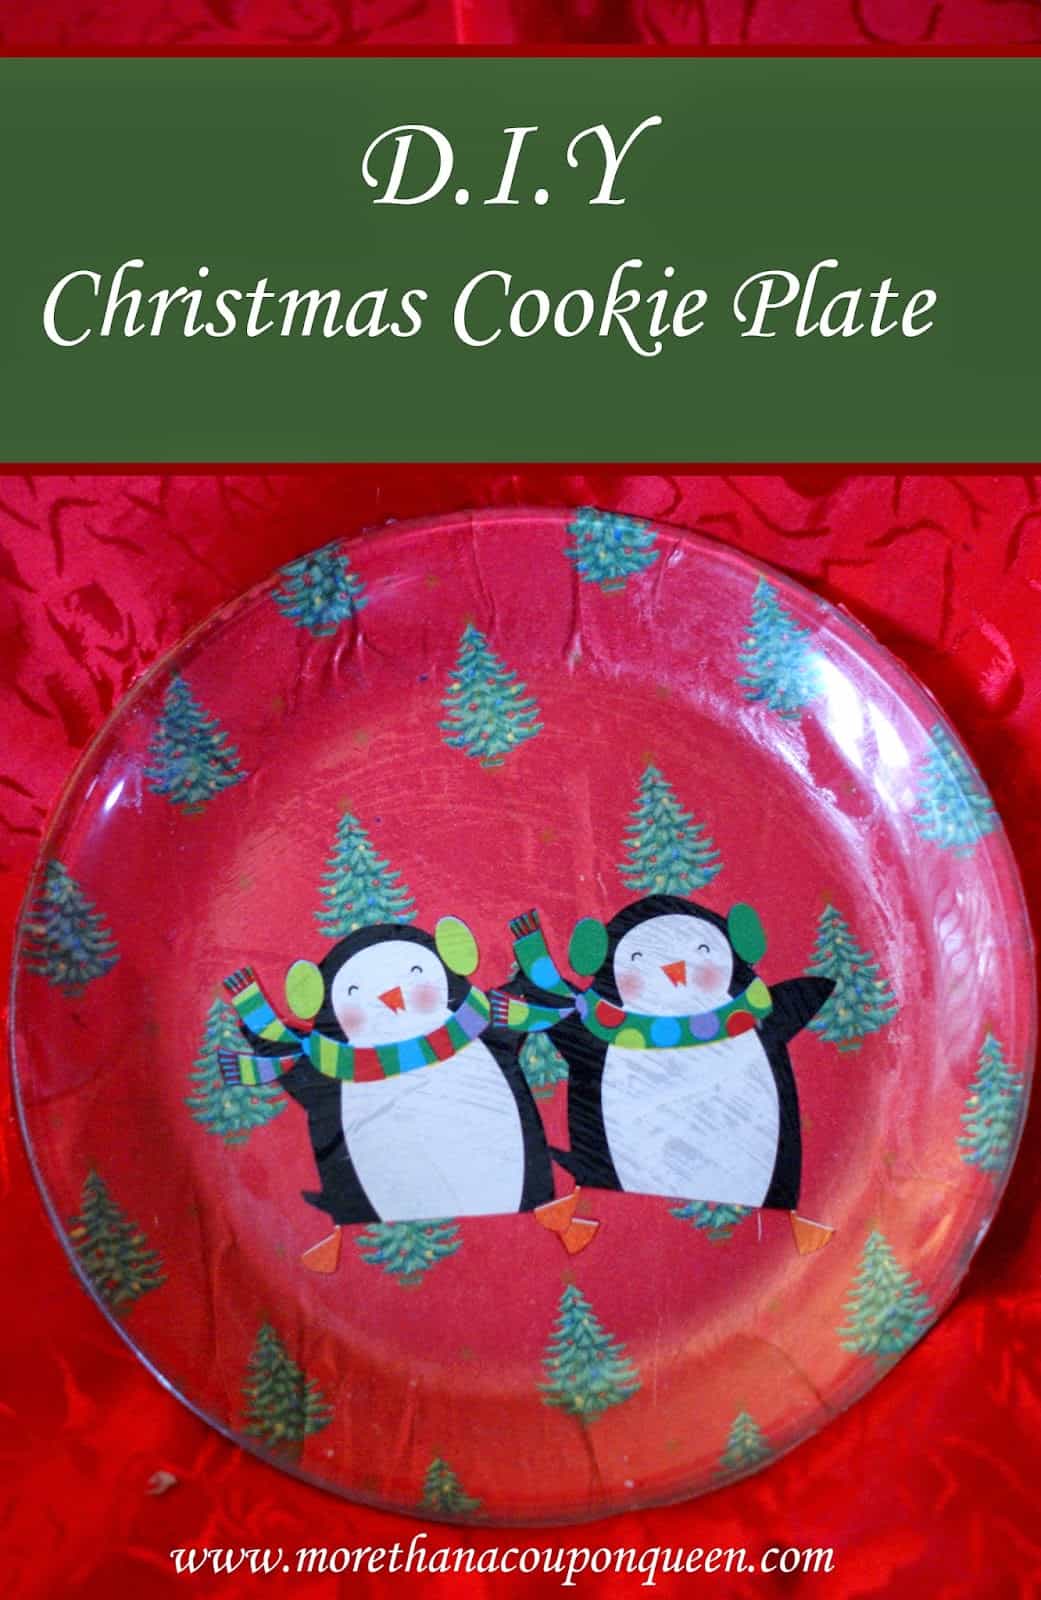 D.I.Y. Christmas Cookie Plate